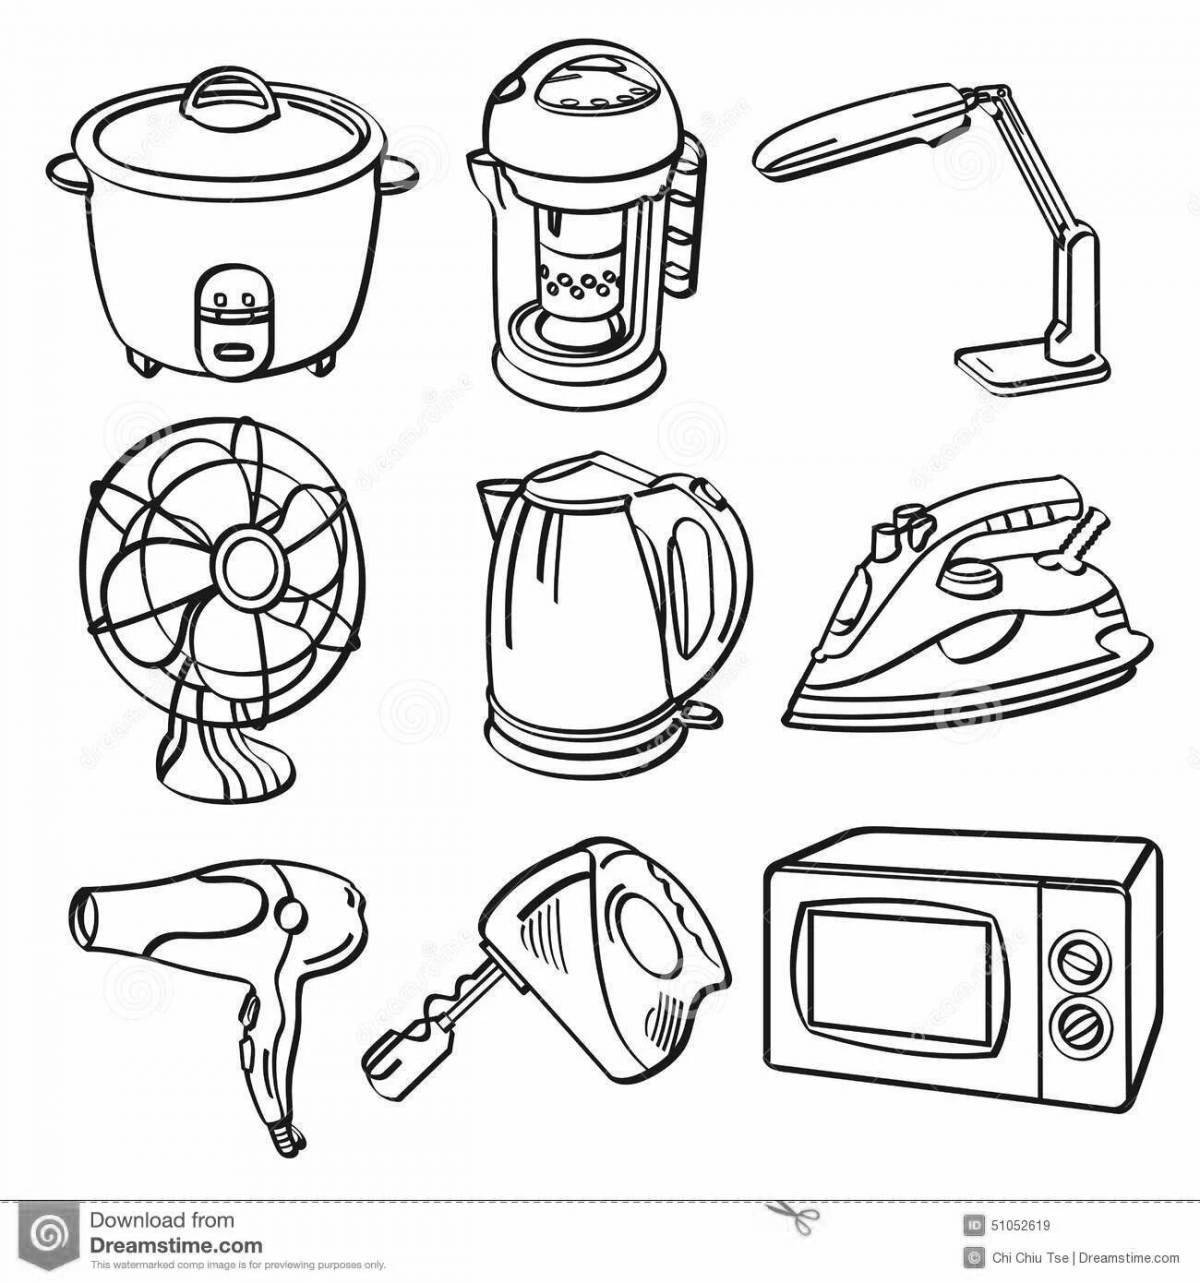 Coloring book exquisite furniture household appliances